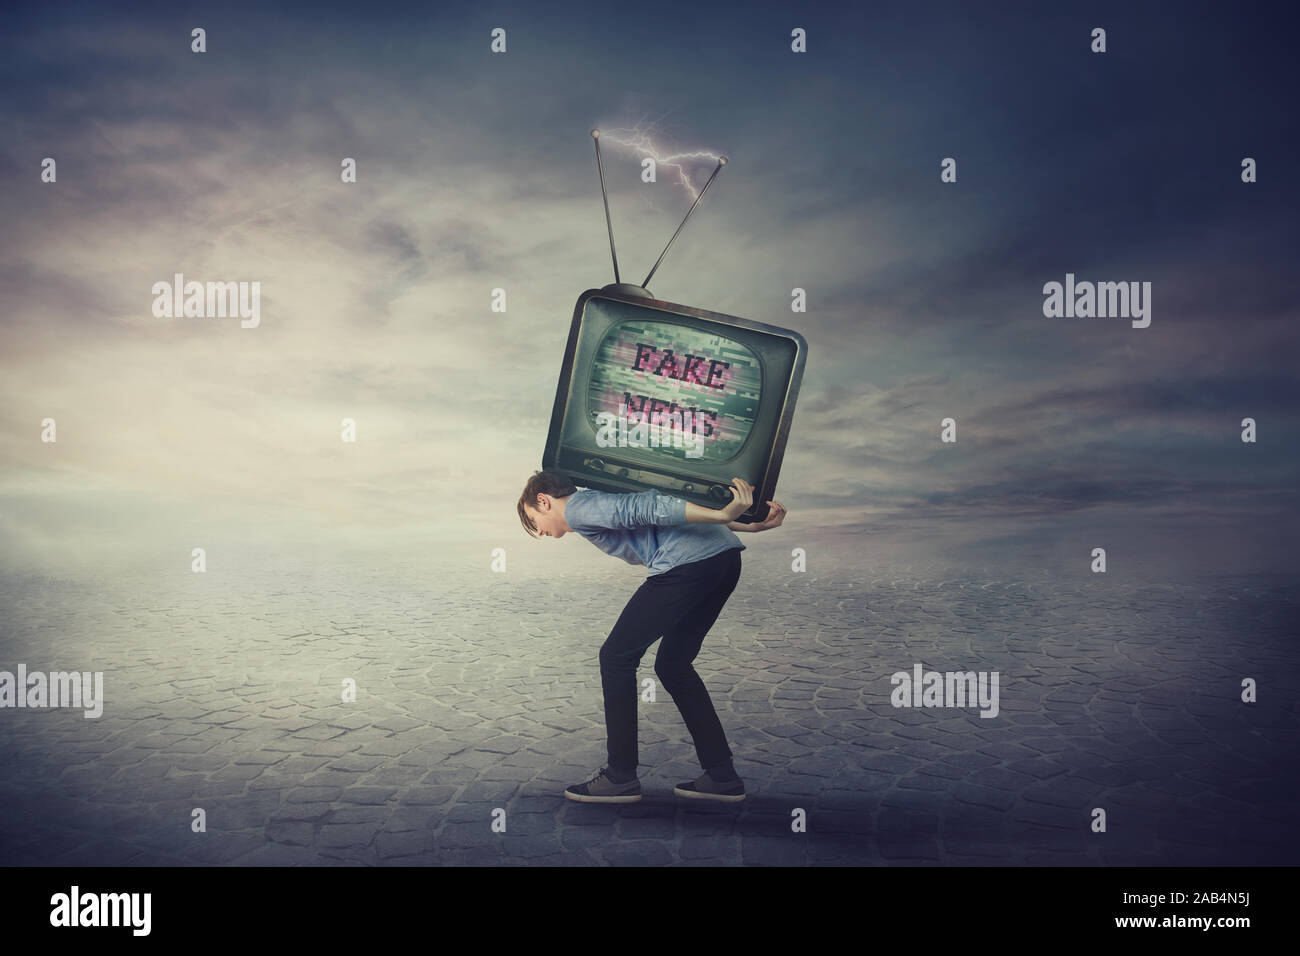 Bent down guy carrying an old TV box on his back. Overloaded man bored of daily fake news on television has a difficult burden. Mass media manipulatio Stock Photo